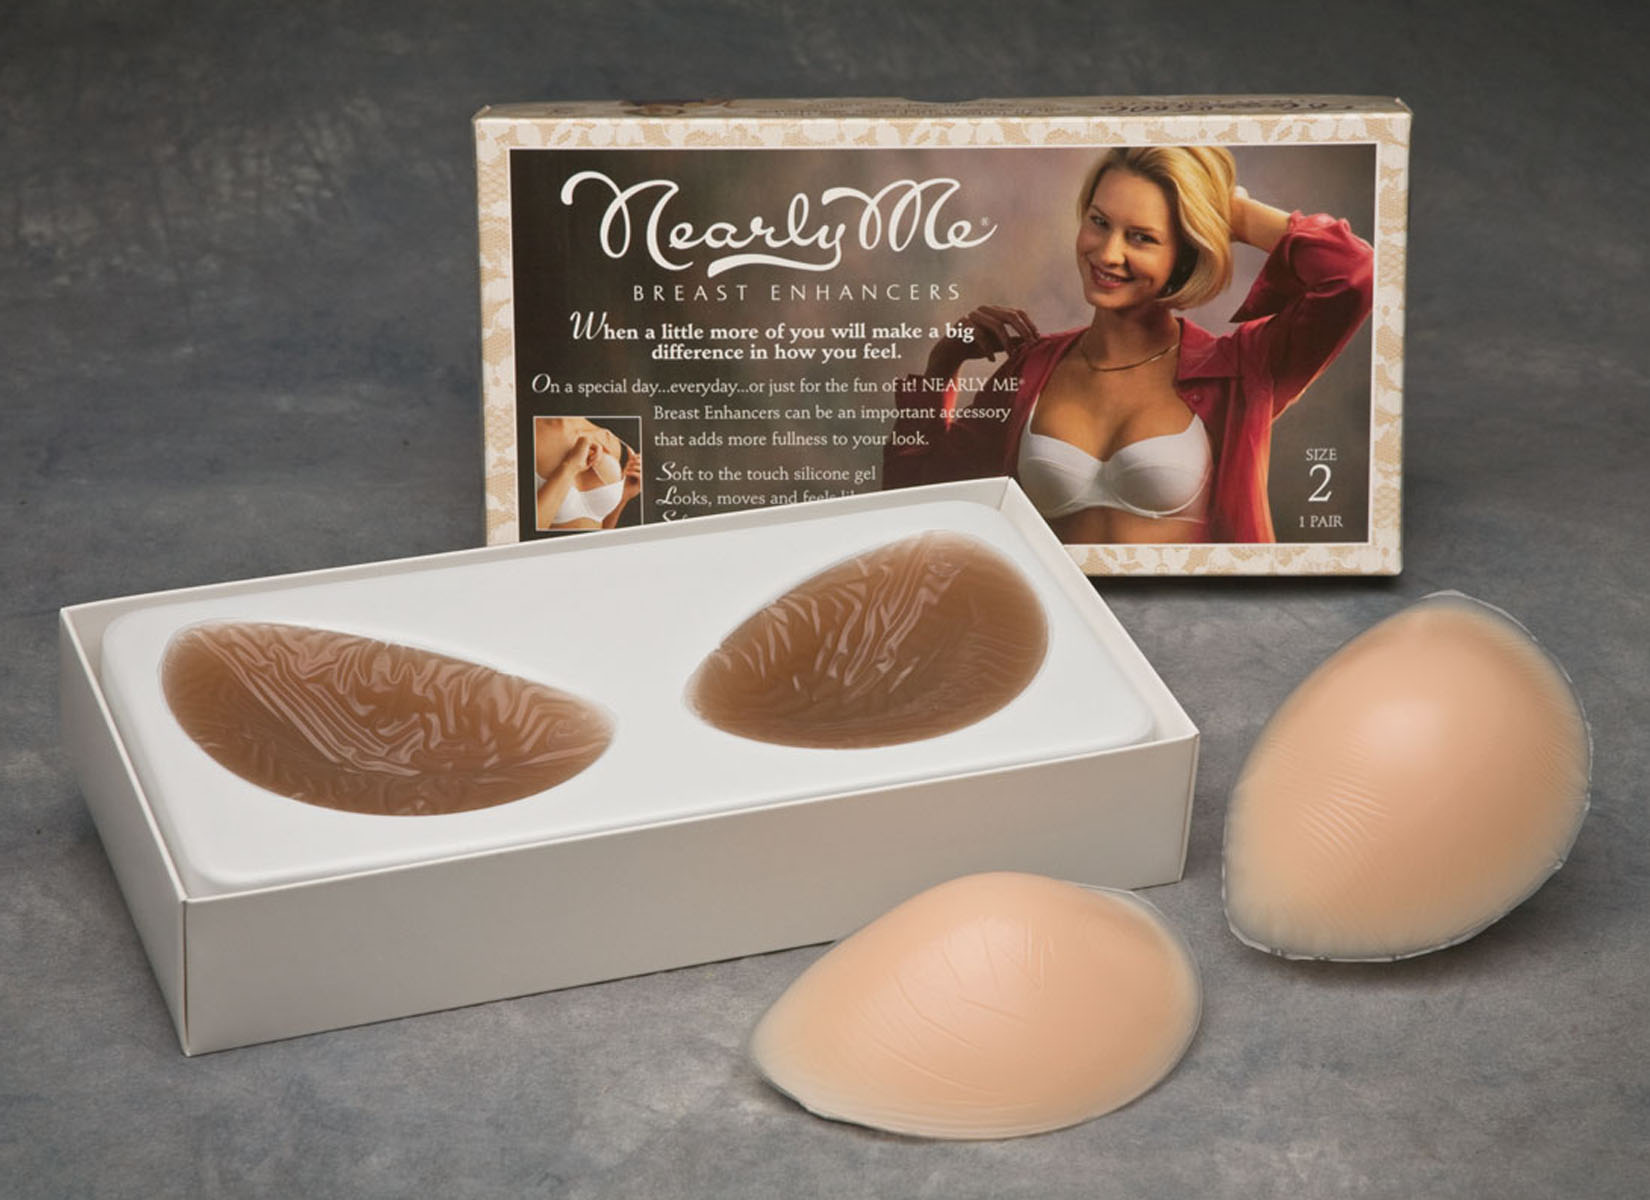 https://www.womanspersonalhealth.com/files/nearly-me-silicone-breast-enhancers.jpg